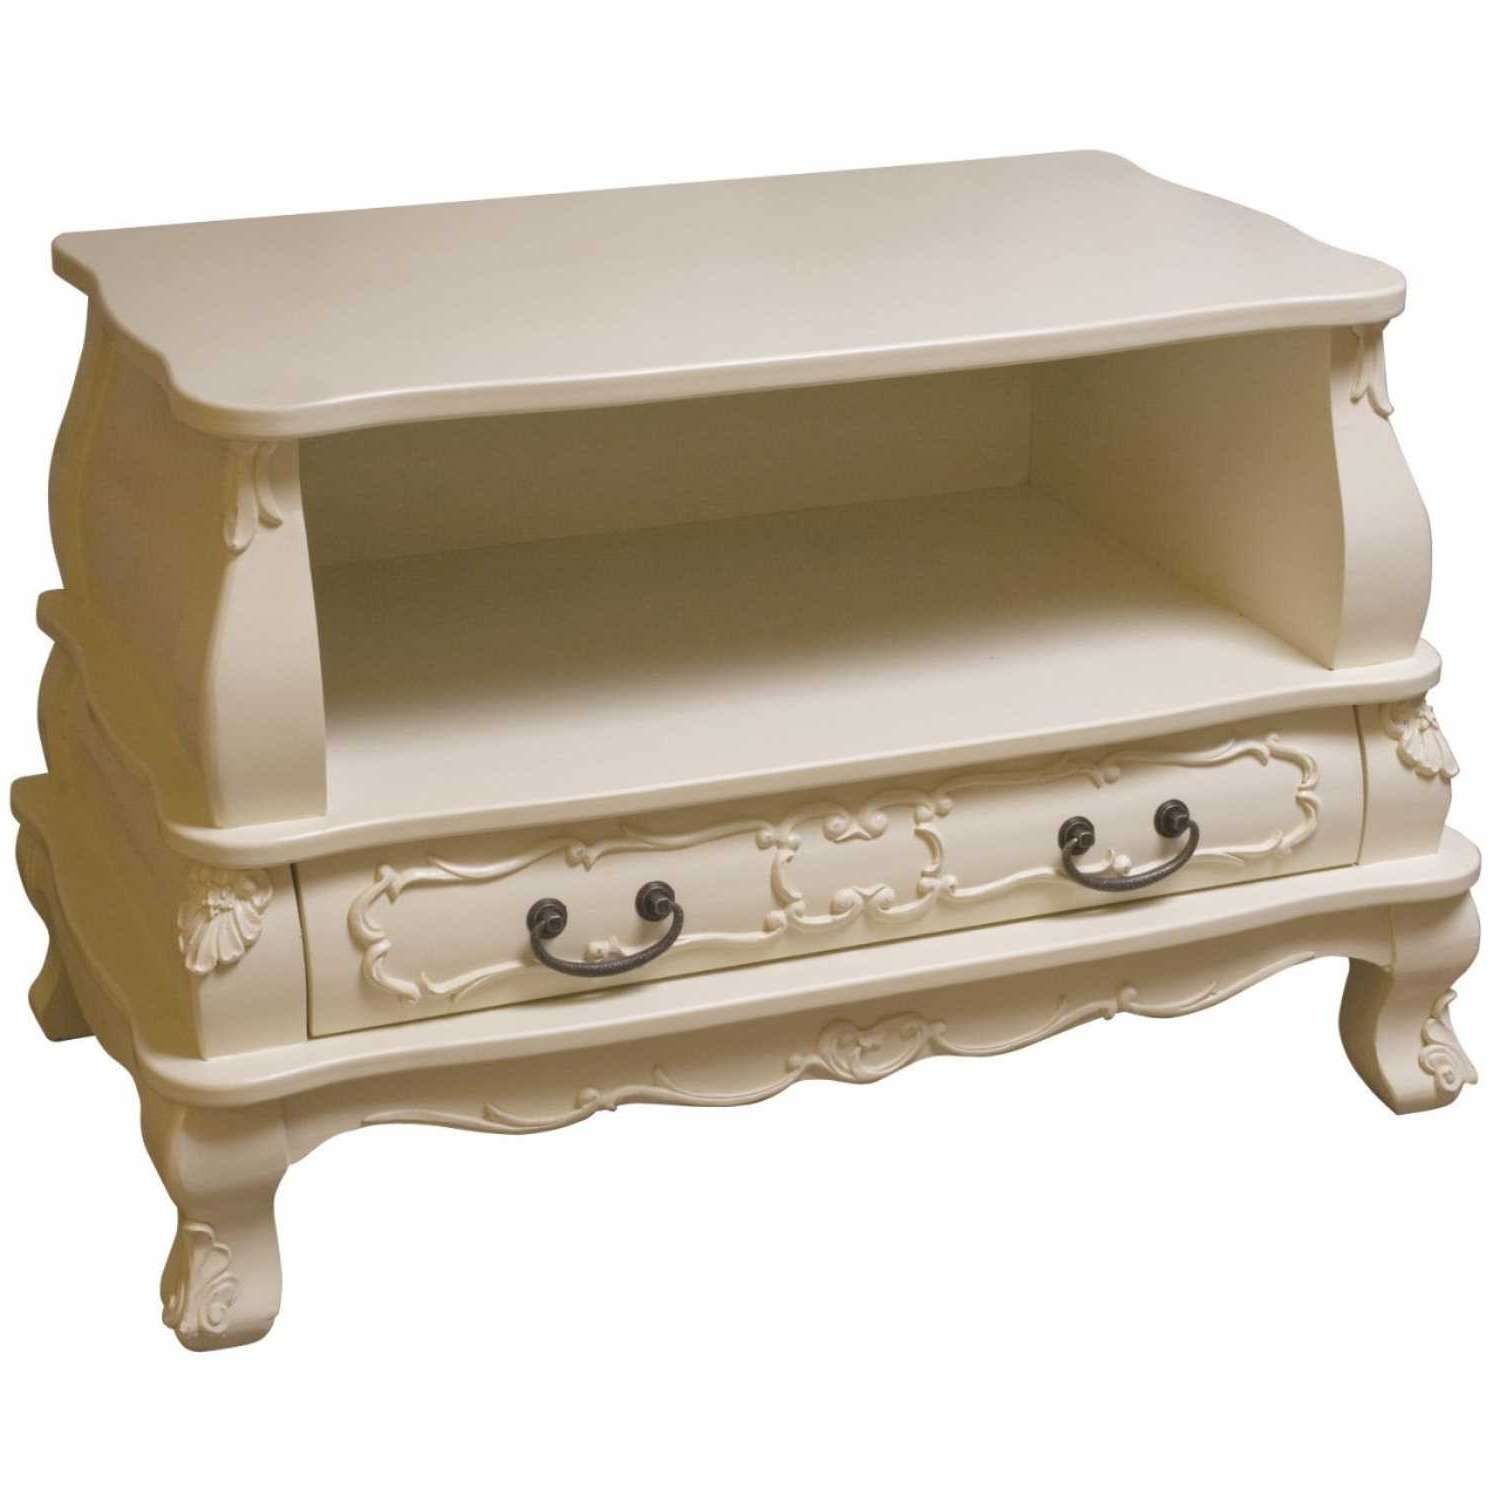 Shabby Chic Cream Painted Brittany Tv Cabinet Intended For Shabby Chic Tv Cabinets (View 4 of 20)